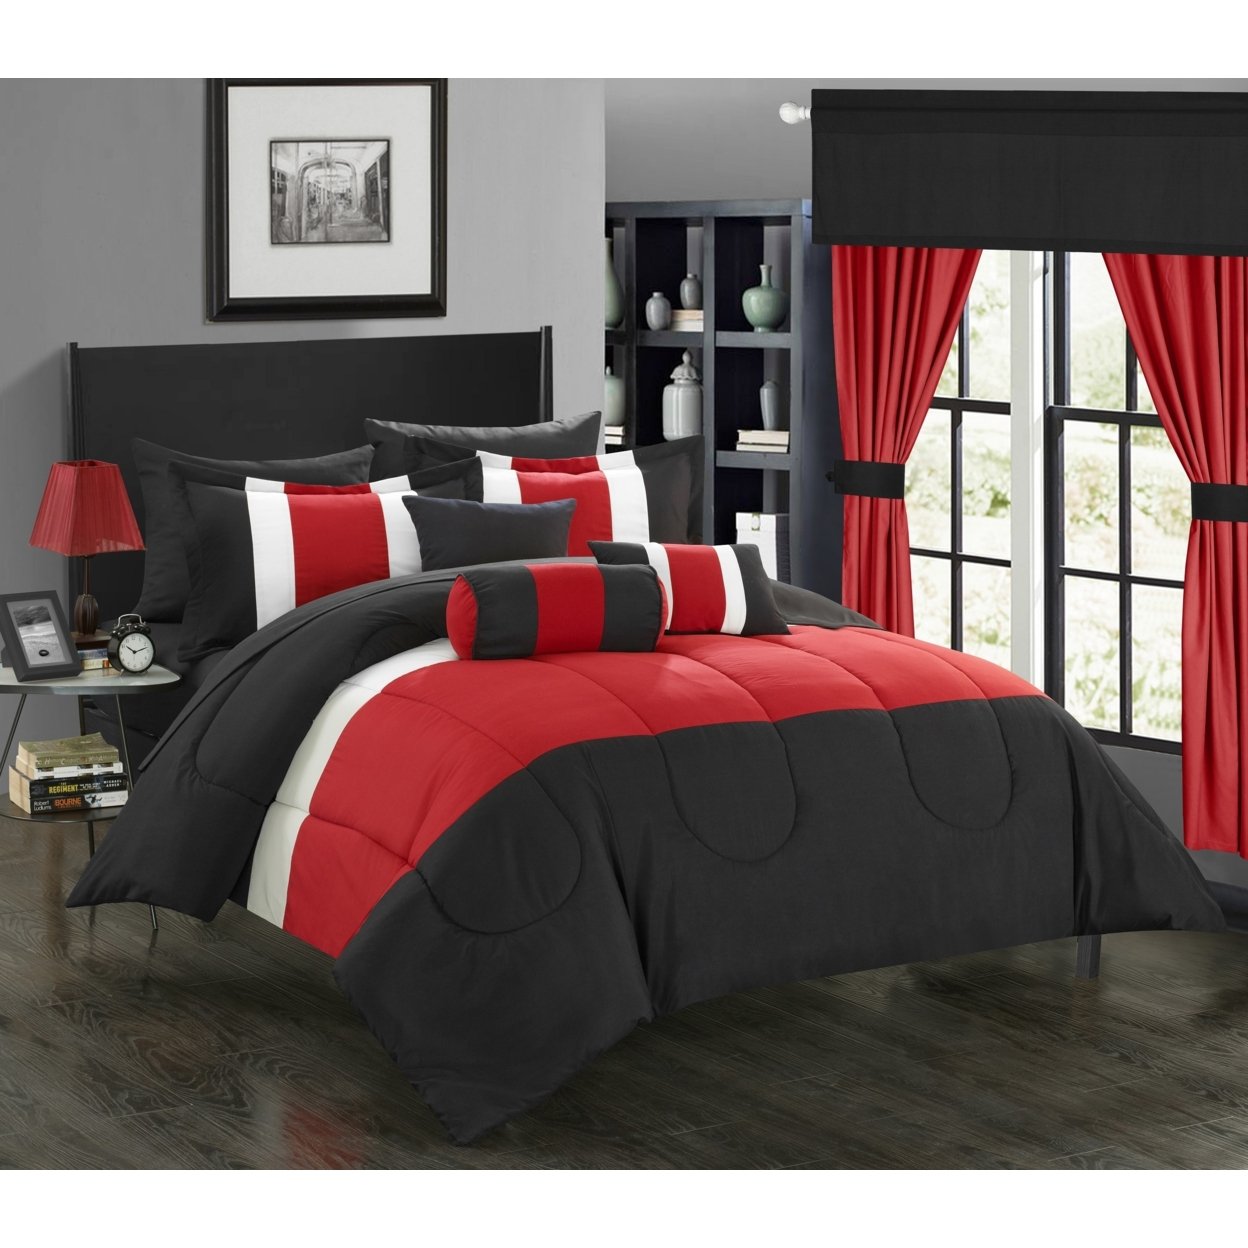 Chic Home 20 Piece Wanstead Complete Pieced Color Block Bedding, Sheets, Window Panel Collection Bed In A Bag Comforter Set - Black, Queen